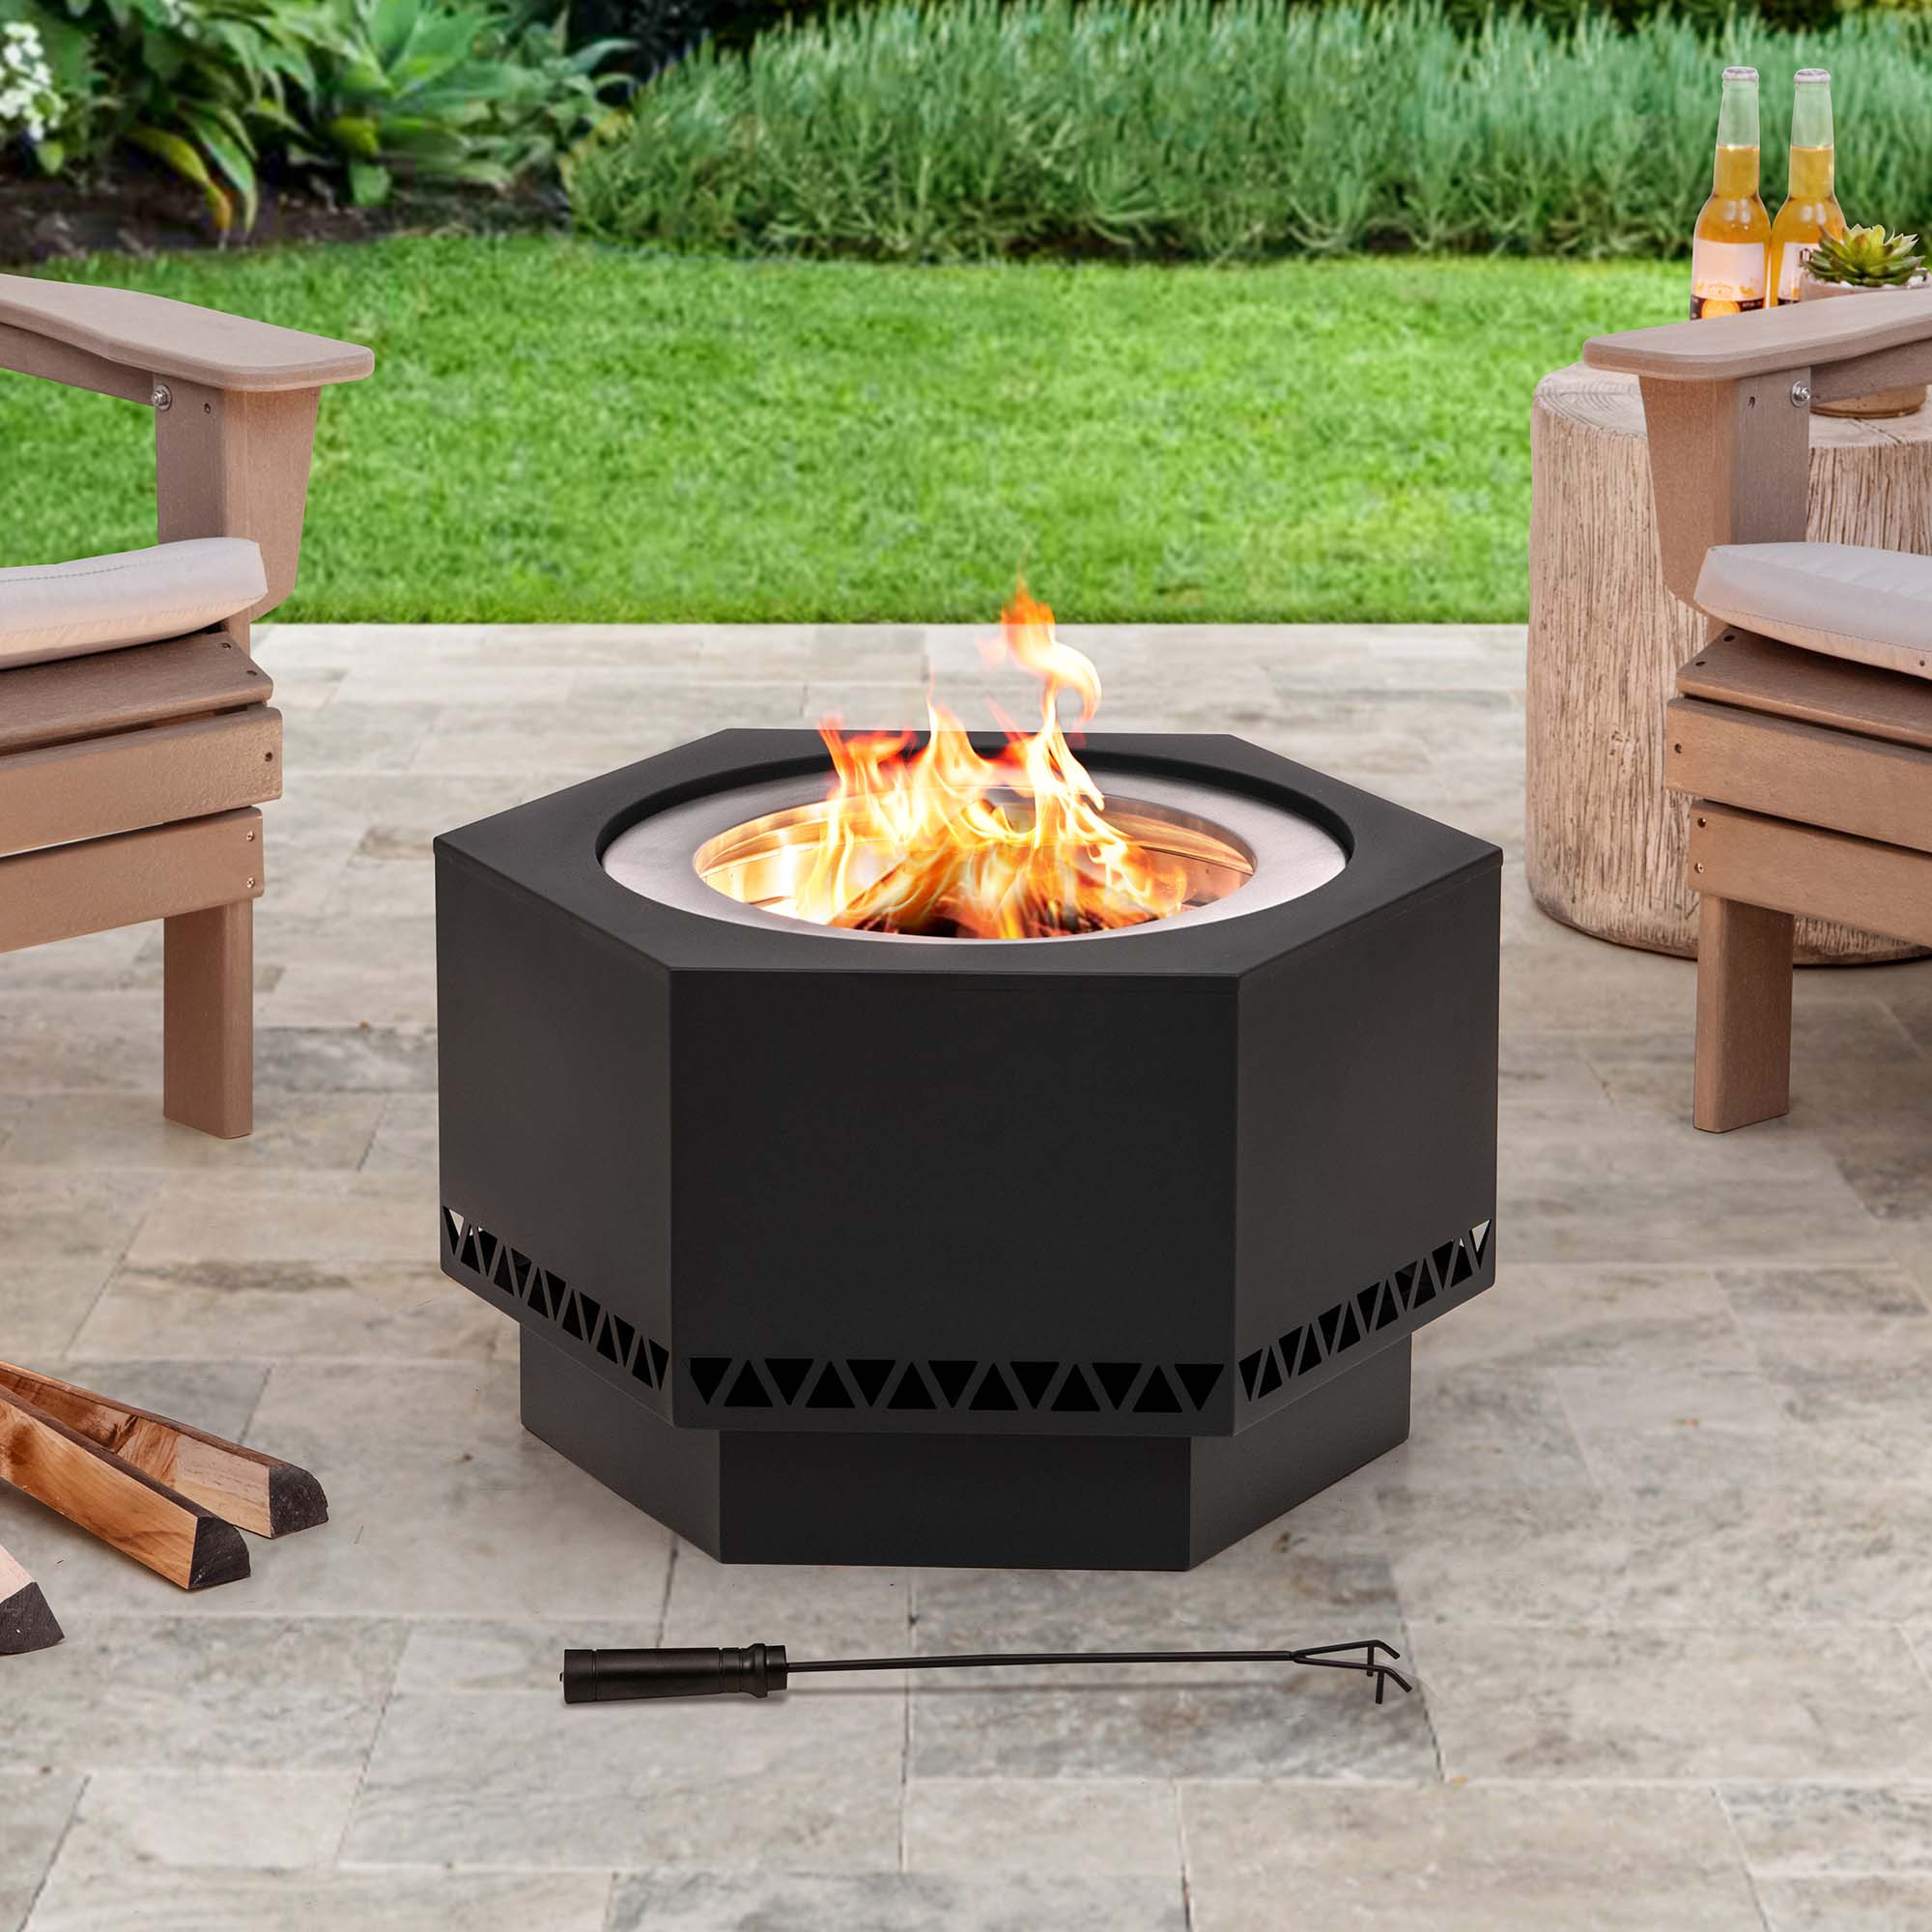 Sunjoy Smokeless Patio Fire Pit, Hexagon Firepit, Outdoor Wood Burning Portable Fire Pit w/ PVC Cover and Fire Poker.